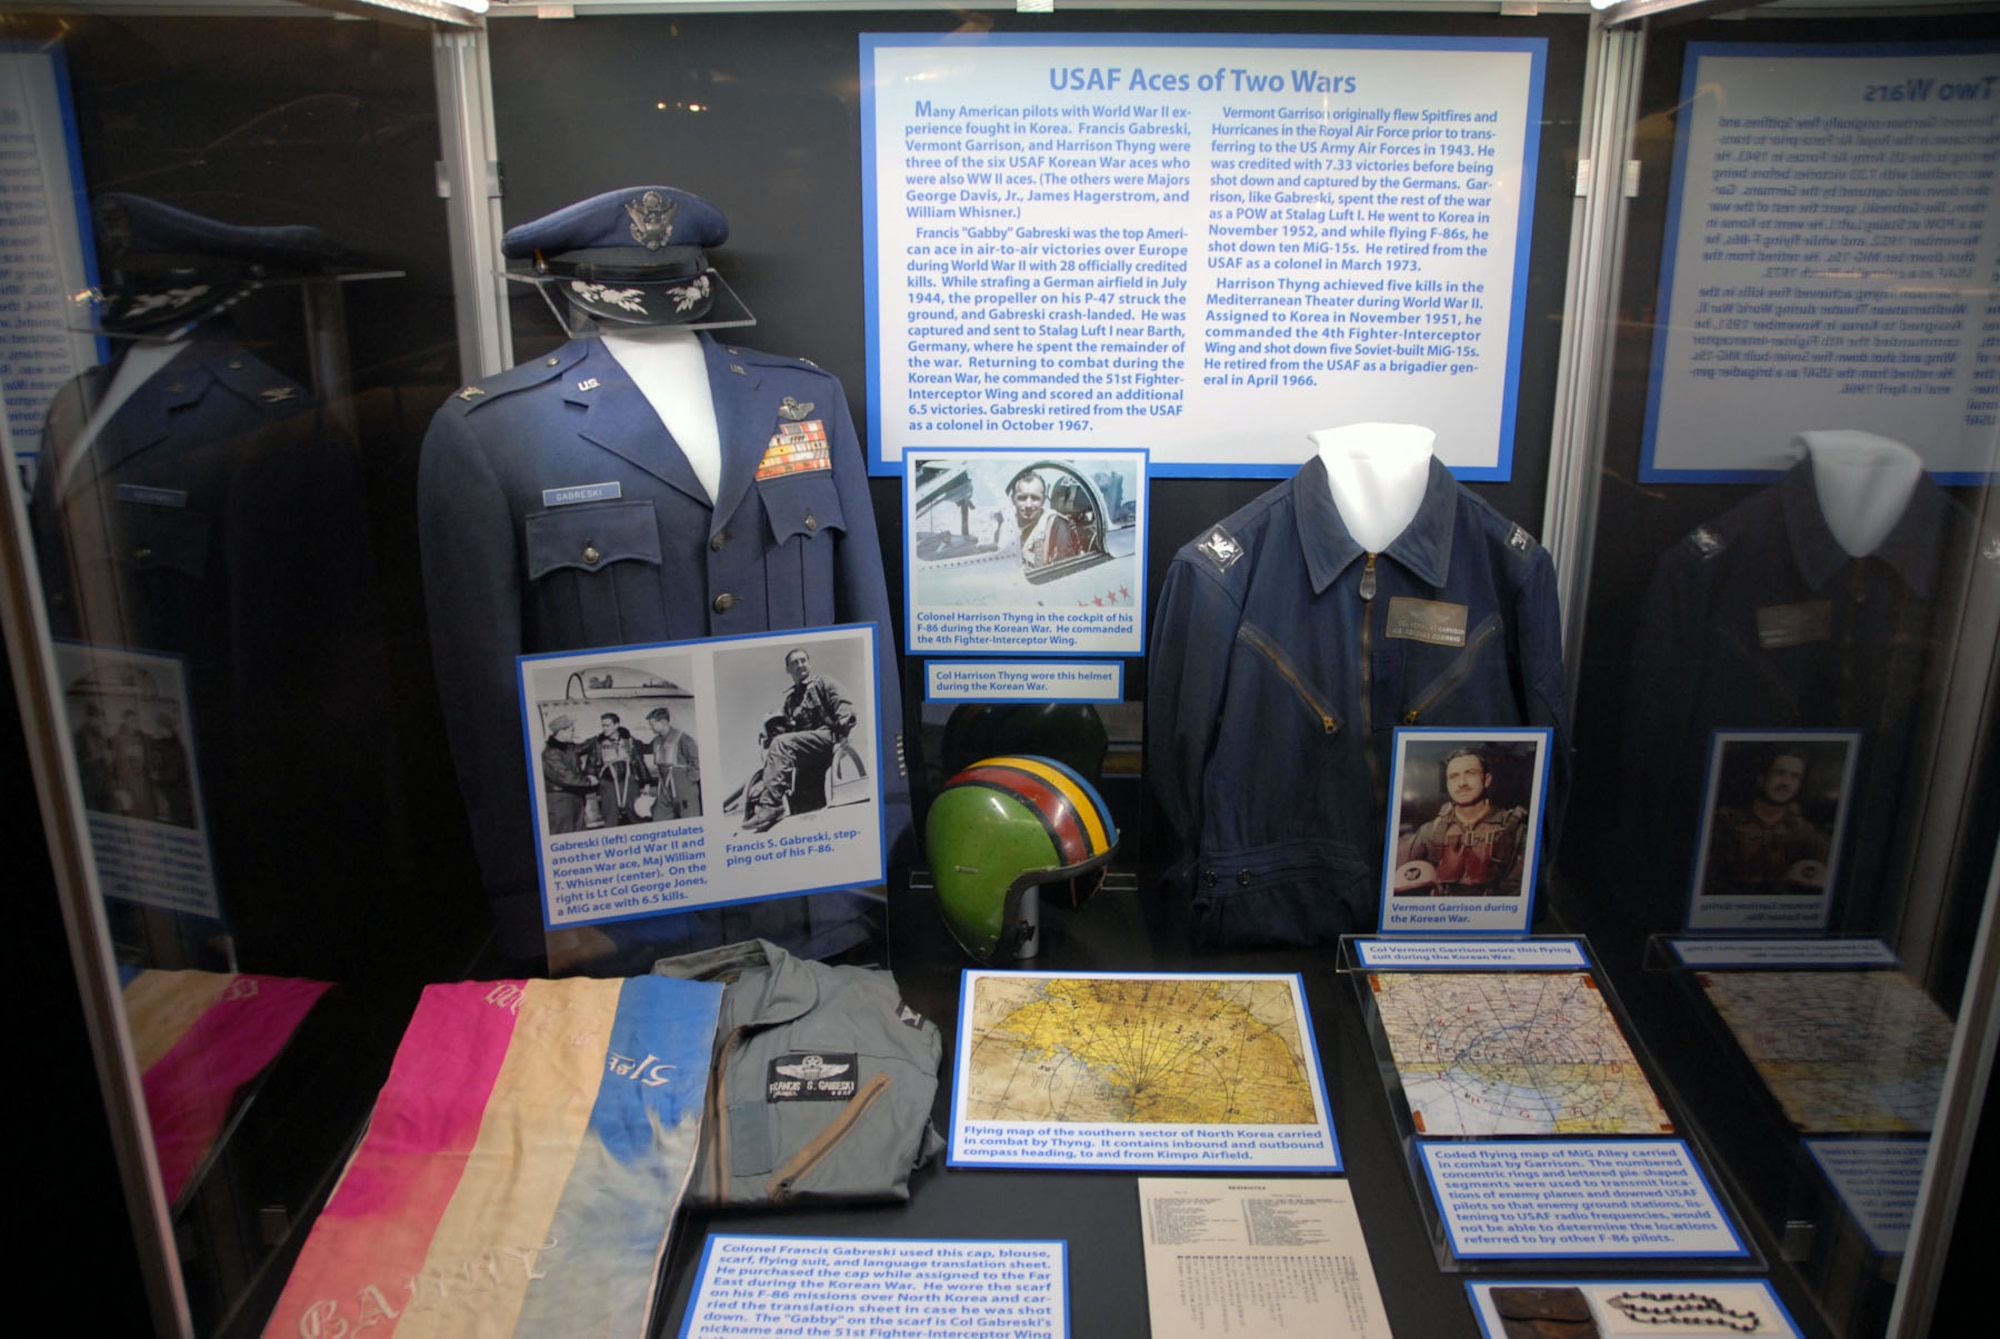 DAYTON, Ohio -- USAF Aces of Two Wars exhibit in the Korean War Gallery at the National Museum of the U.S. Air Force. (U.S. Air Force photo)